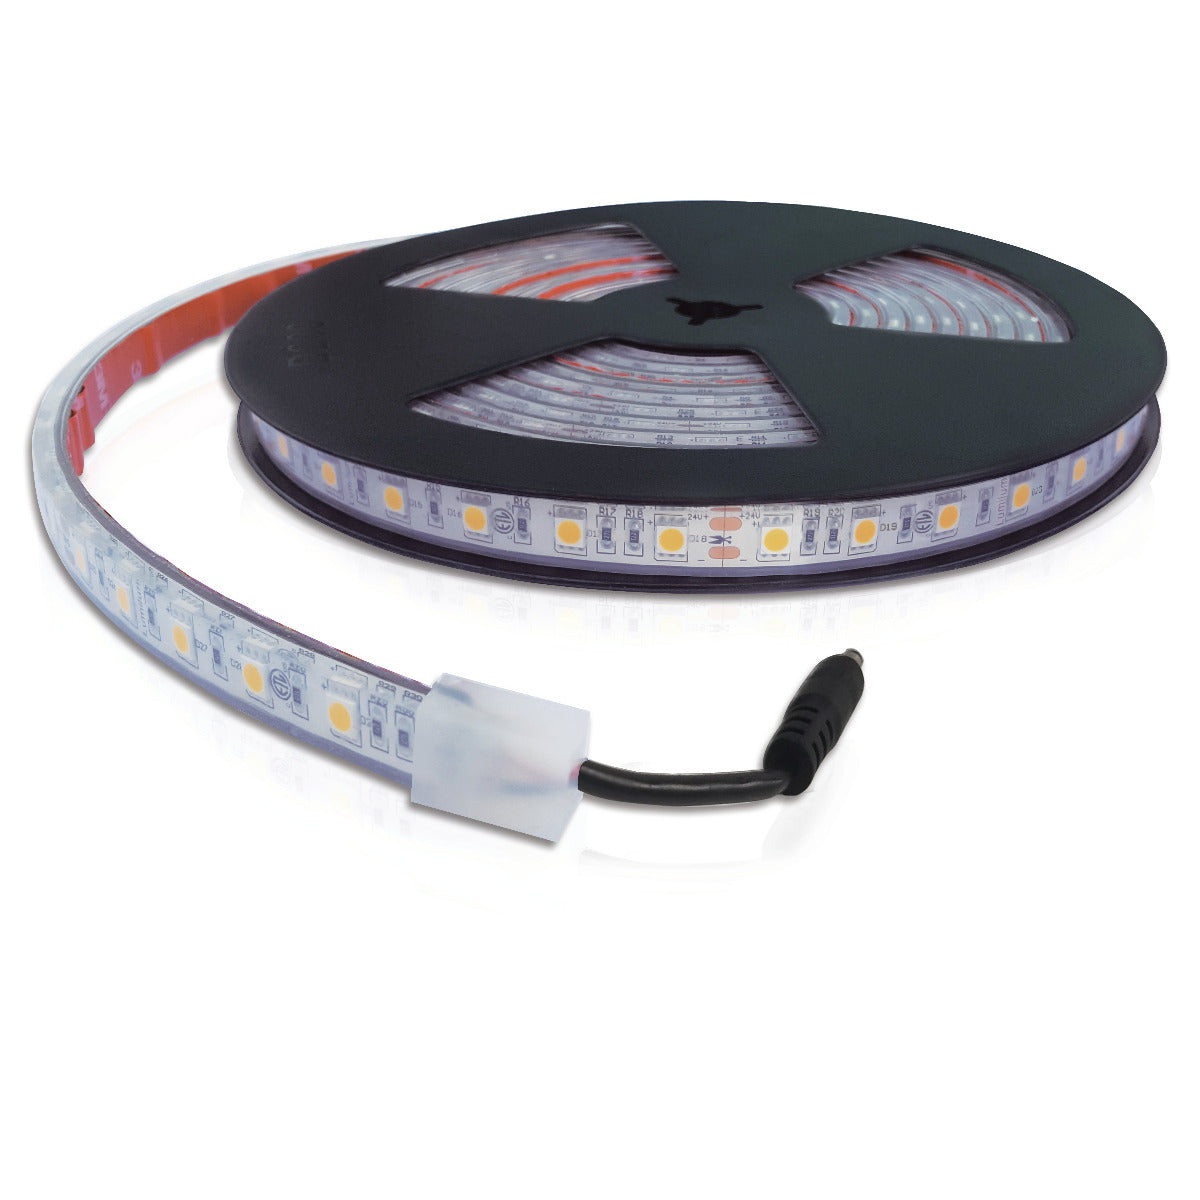 ip67 silicone encased led strip light with visible yellow chips loosely coiled on black reel with red and black connector end